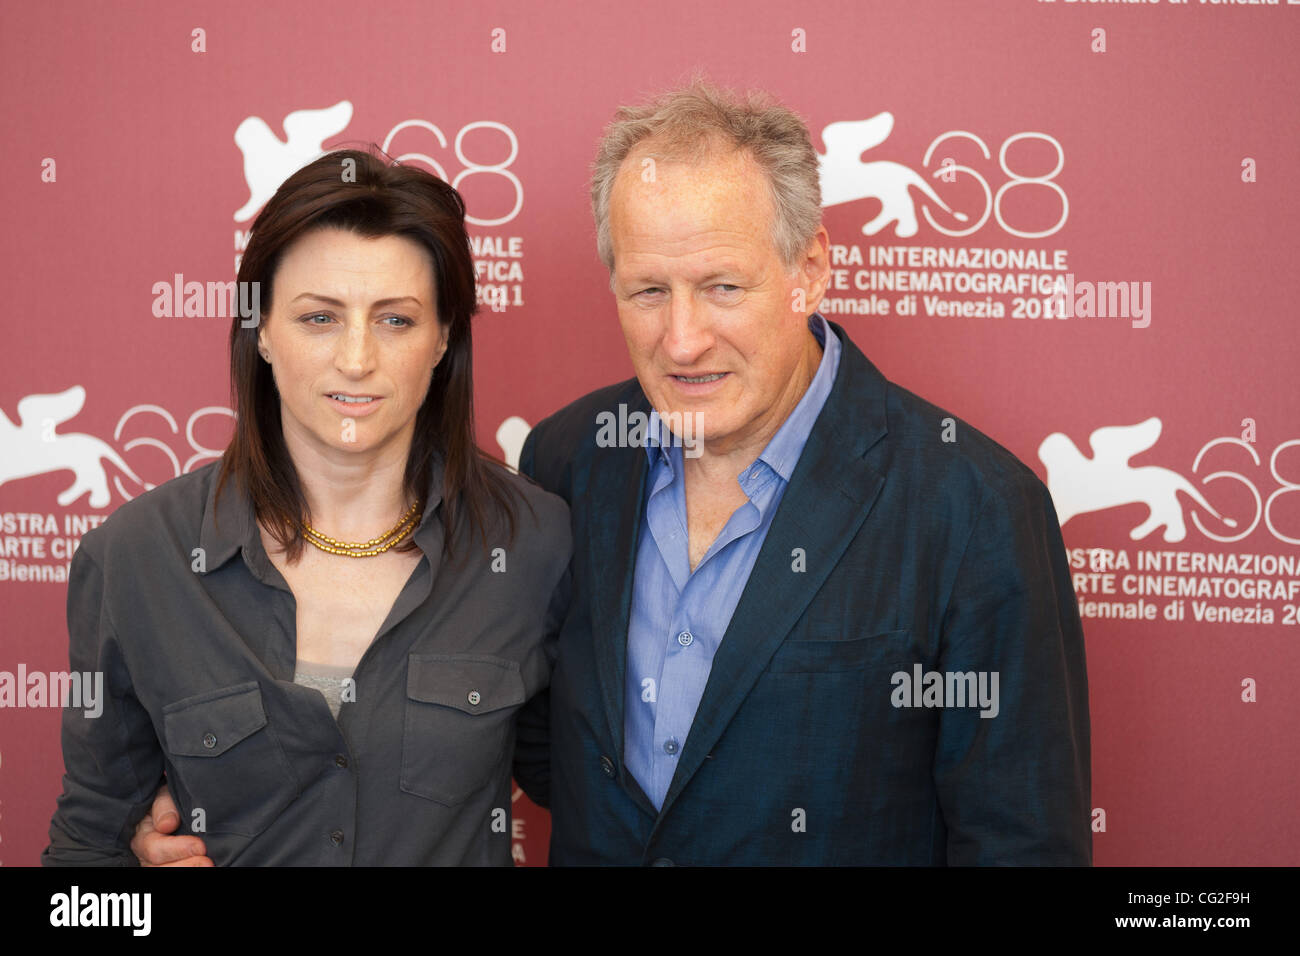 Sept. 9, 2011 - Venice, Italy - director Ami Canaan Mann and producer  Michael Mann during photocall before 'Texas Killing fields' movie directed  by Ami Canaan Mann premiere during the 68th Venice